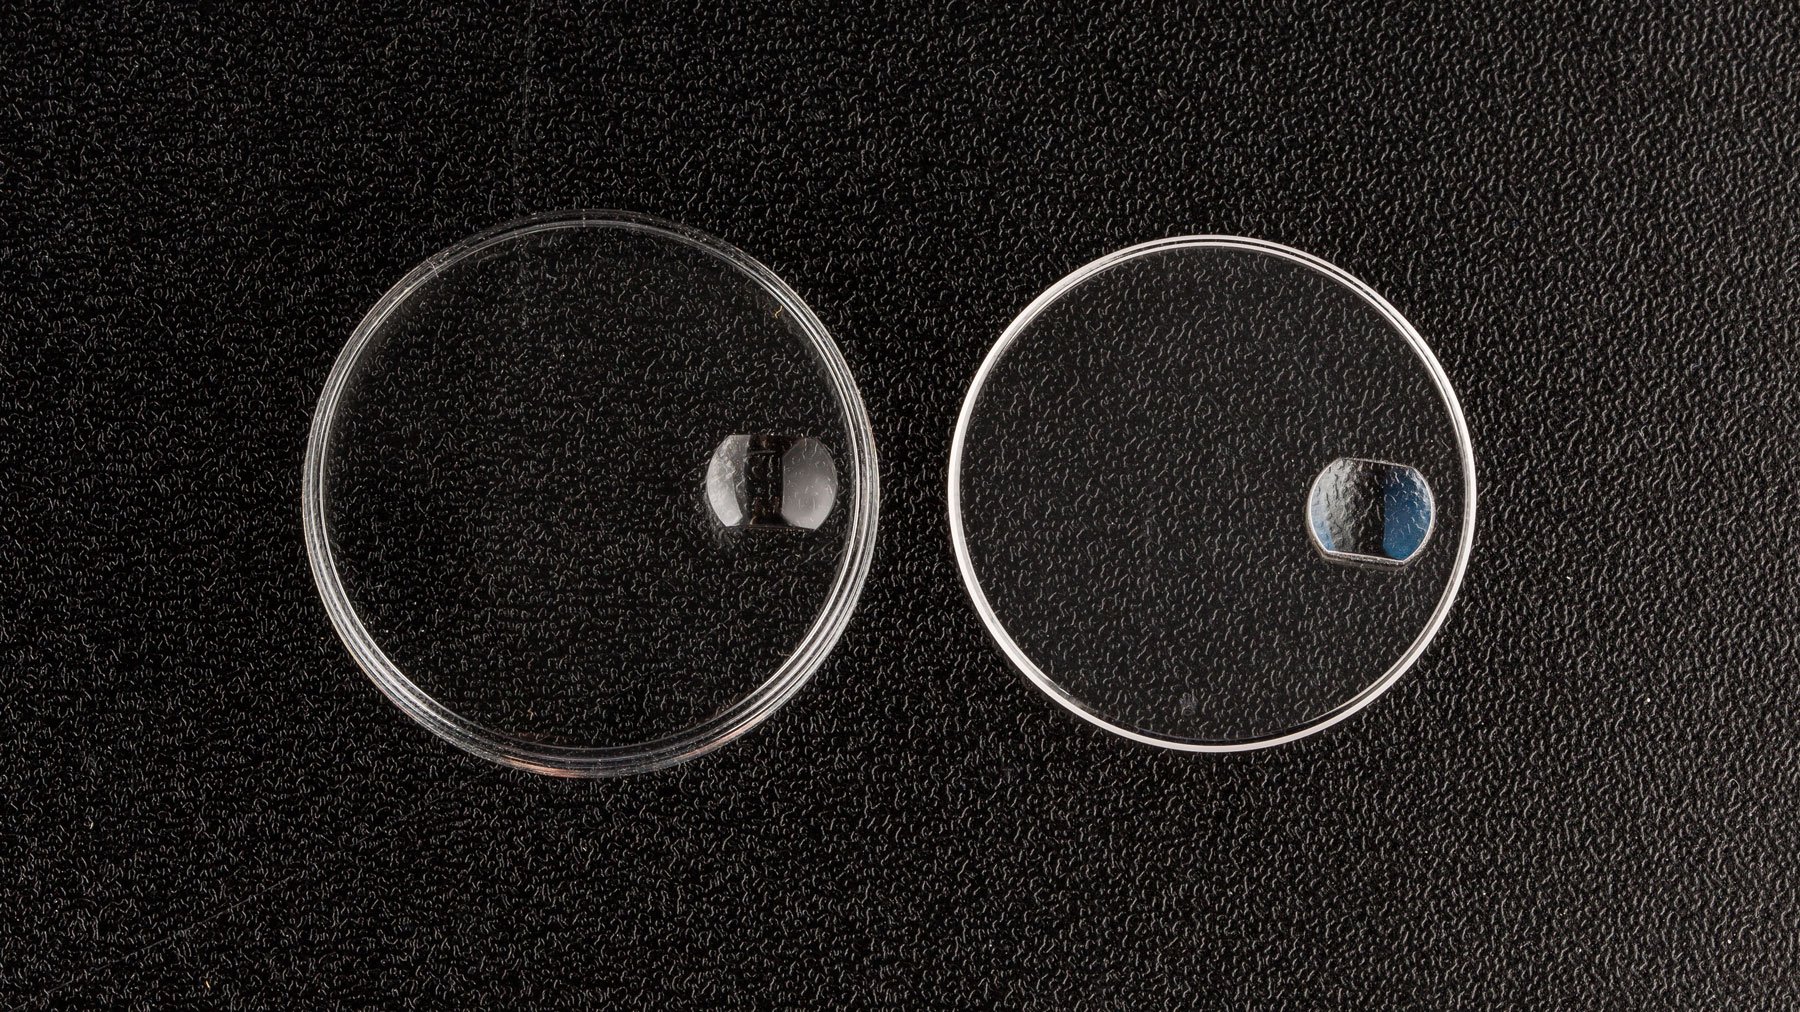 changes between the acrylic crystal on the left versus the sapphire crystal on the right